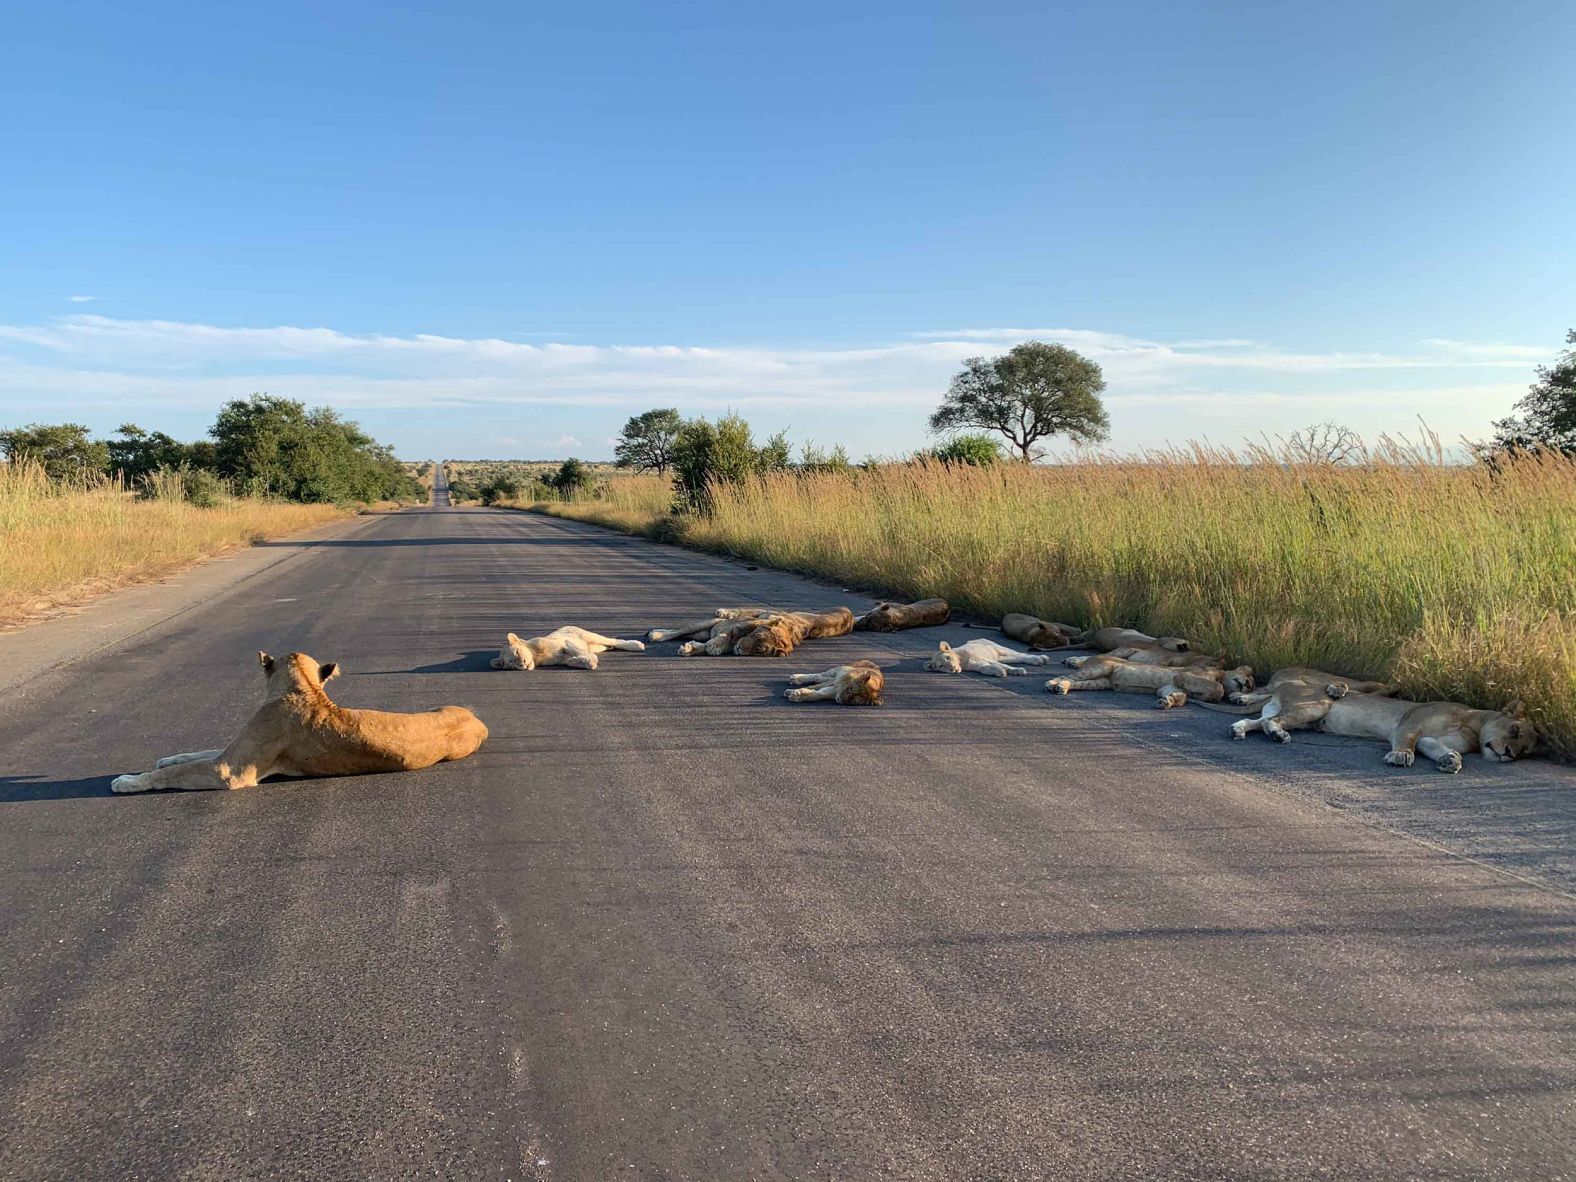 Lions <a href="https://www.cnn.com/travel/article/lions-kruger-lockdown-scli-intl/index.html" target="_blank">take a cat nap</a> on a normally busy road in South Africa's Kruger National Park on April 15. "Lying on the road during the daytime is unusual, because under normal circumstances there would be traffic and that pushes them into the bush," park spokesman Isaac Phaahla told CNN.